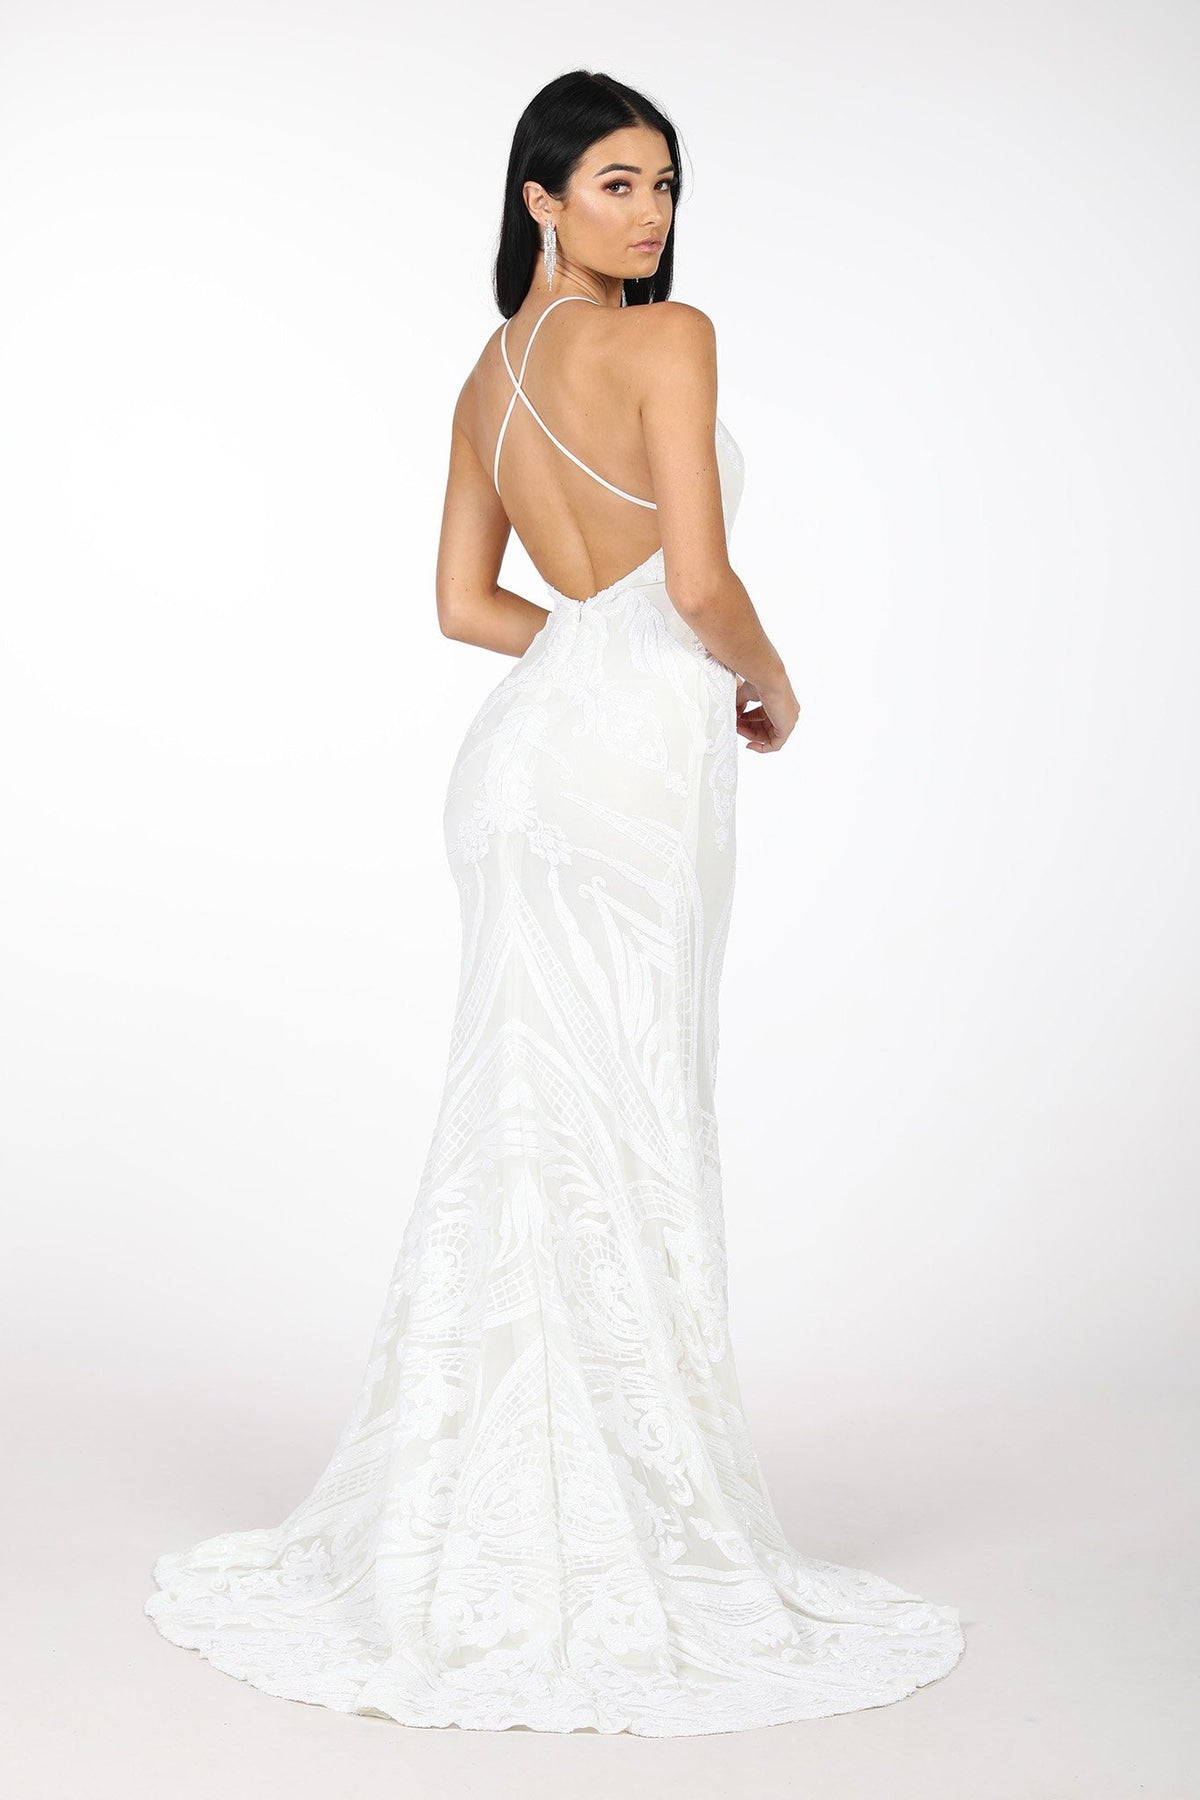 Back Crisscross Thin Straps Design of Ivory White Full Length Evening Pattern Sequin Gown with White Underlay, V neckline, Criss-cross Straps on Open Back, Thigh-high Side Slit, Fit and Flare Silhouette and Sweep Train